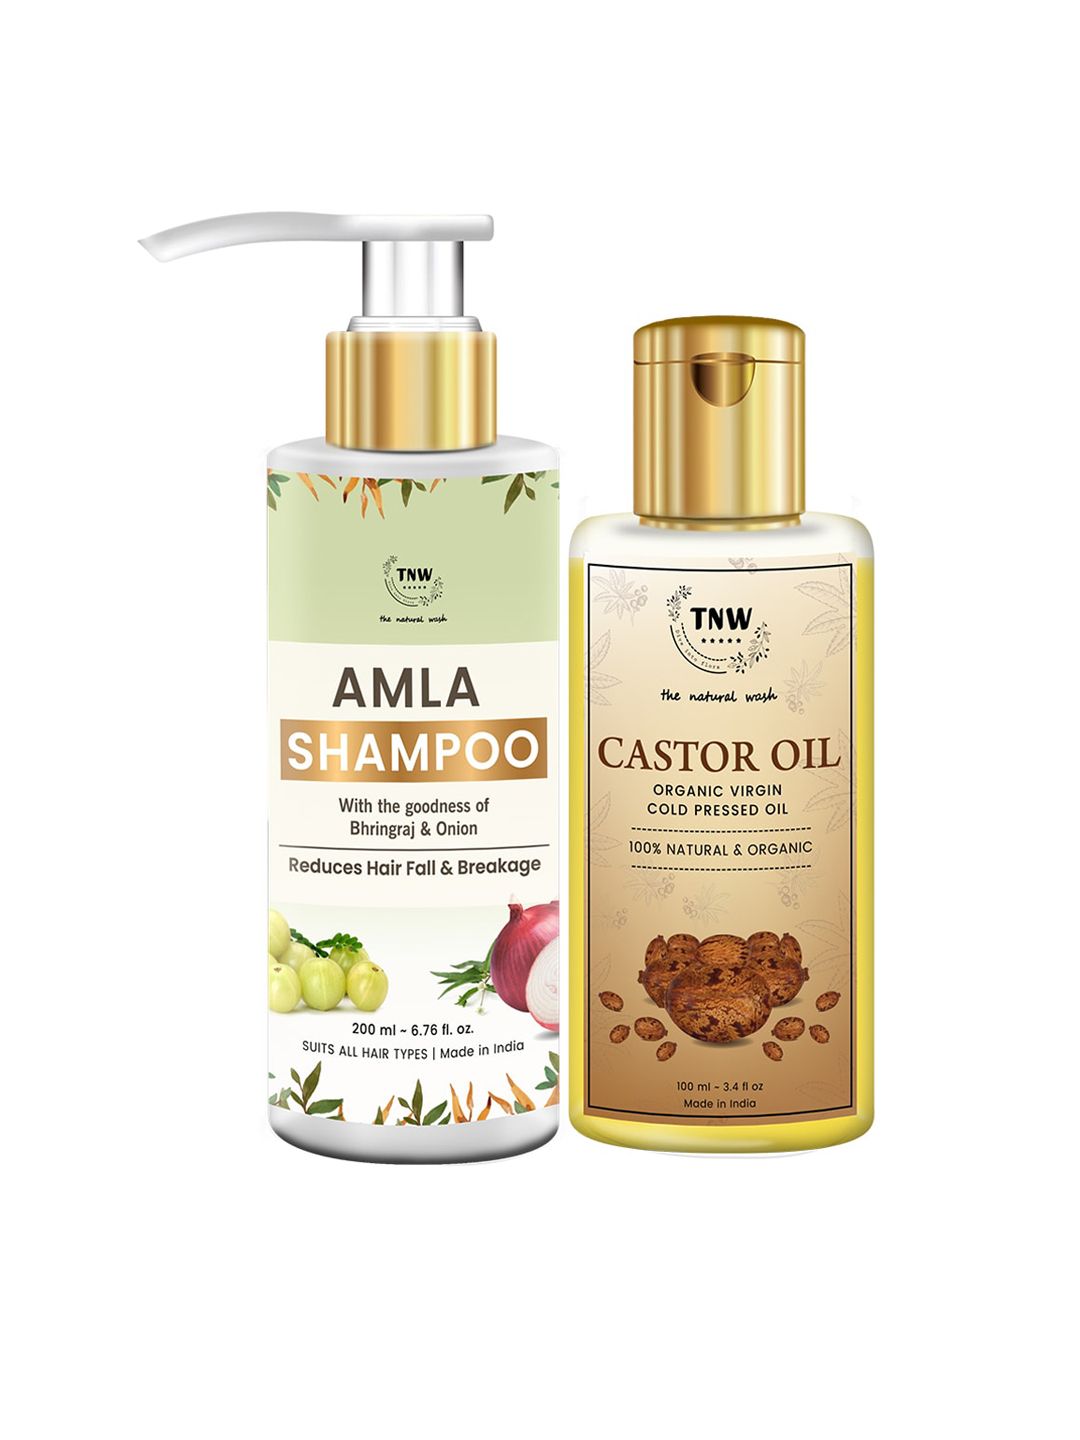 TNW the natural wash White Amla Shampoo & Castor Oil Hair Care Kit Price in India